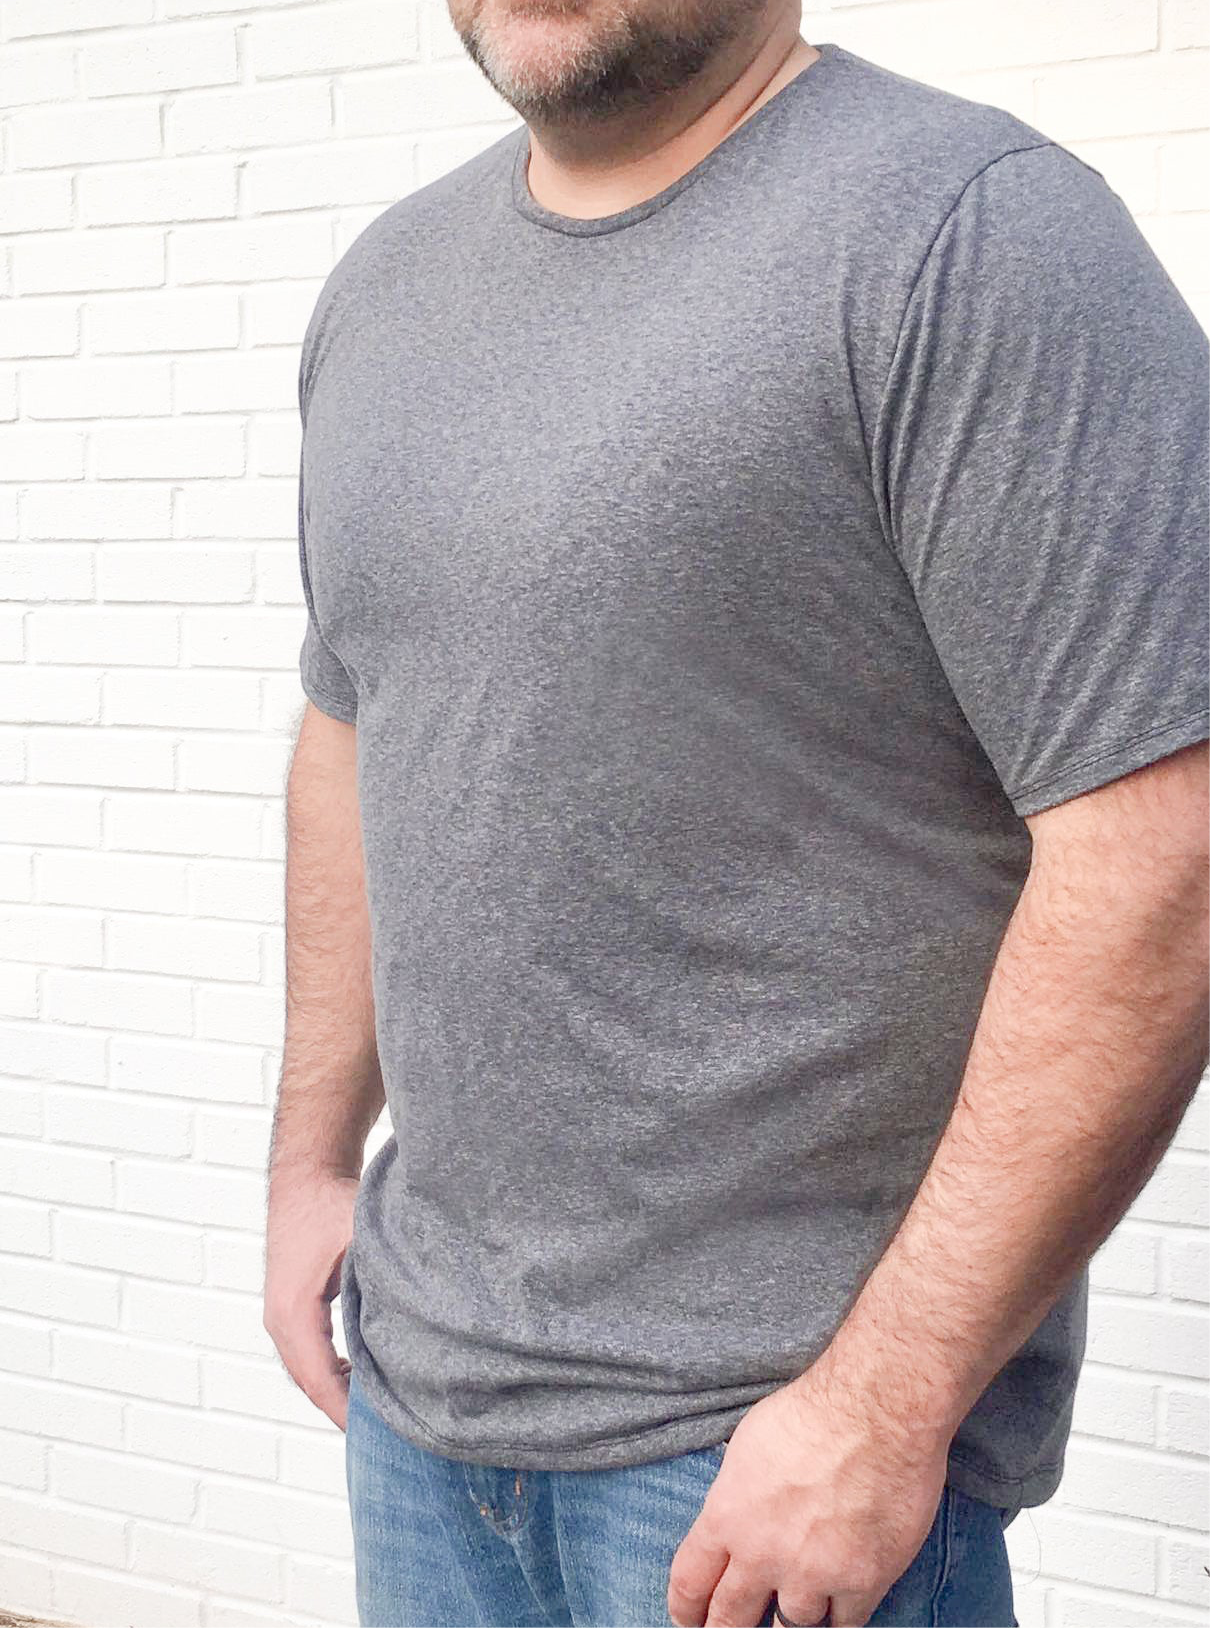 Men's Daily Tee - Big + Tall - Athletic Fit PDF pattern for sizes XLT-4XLT